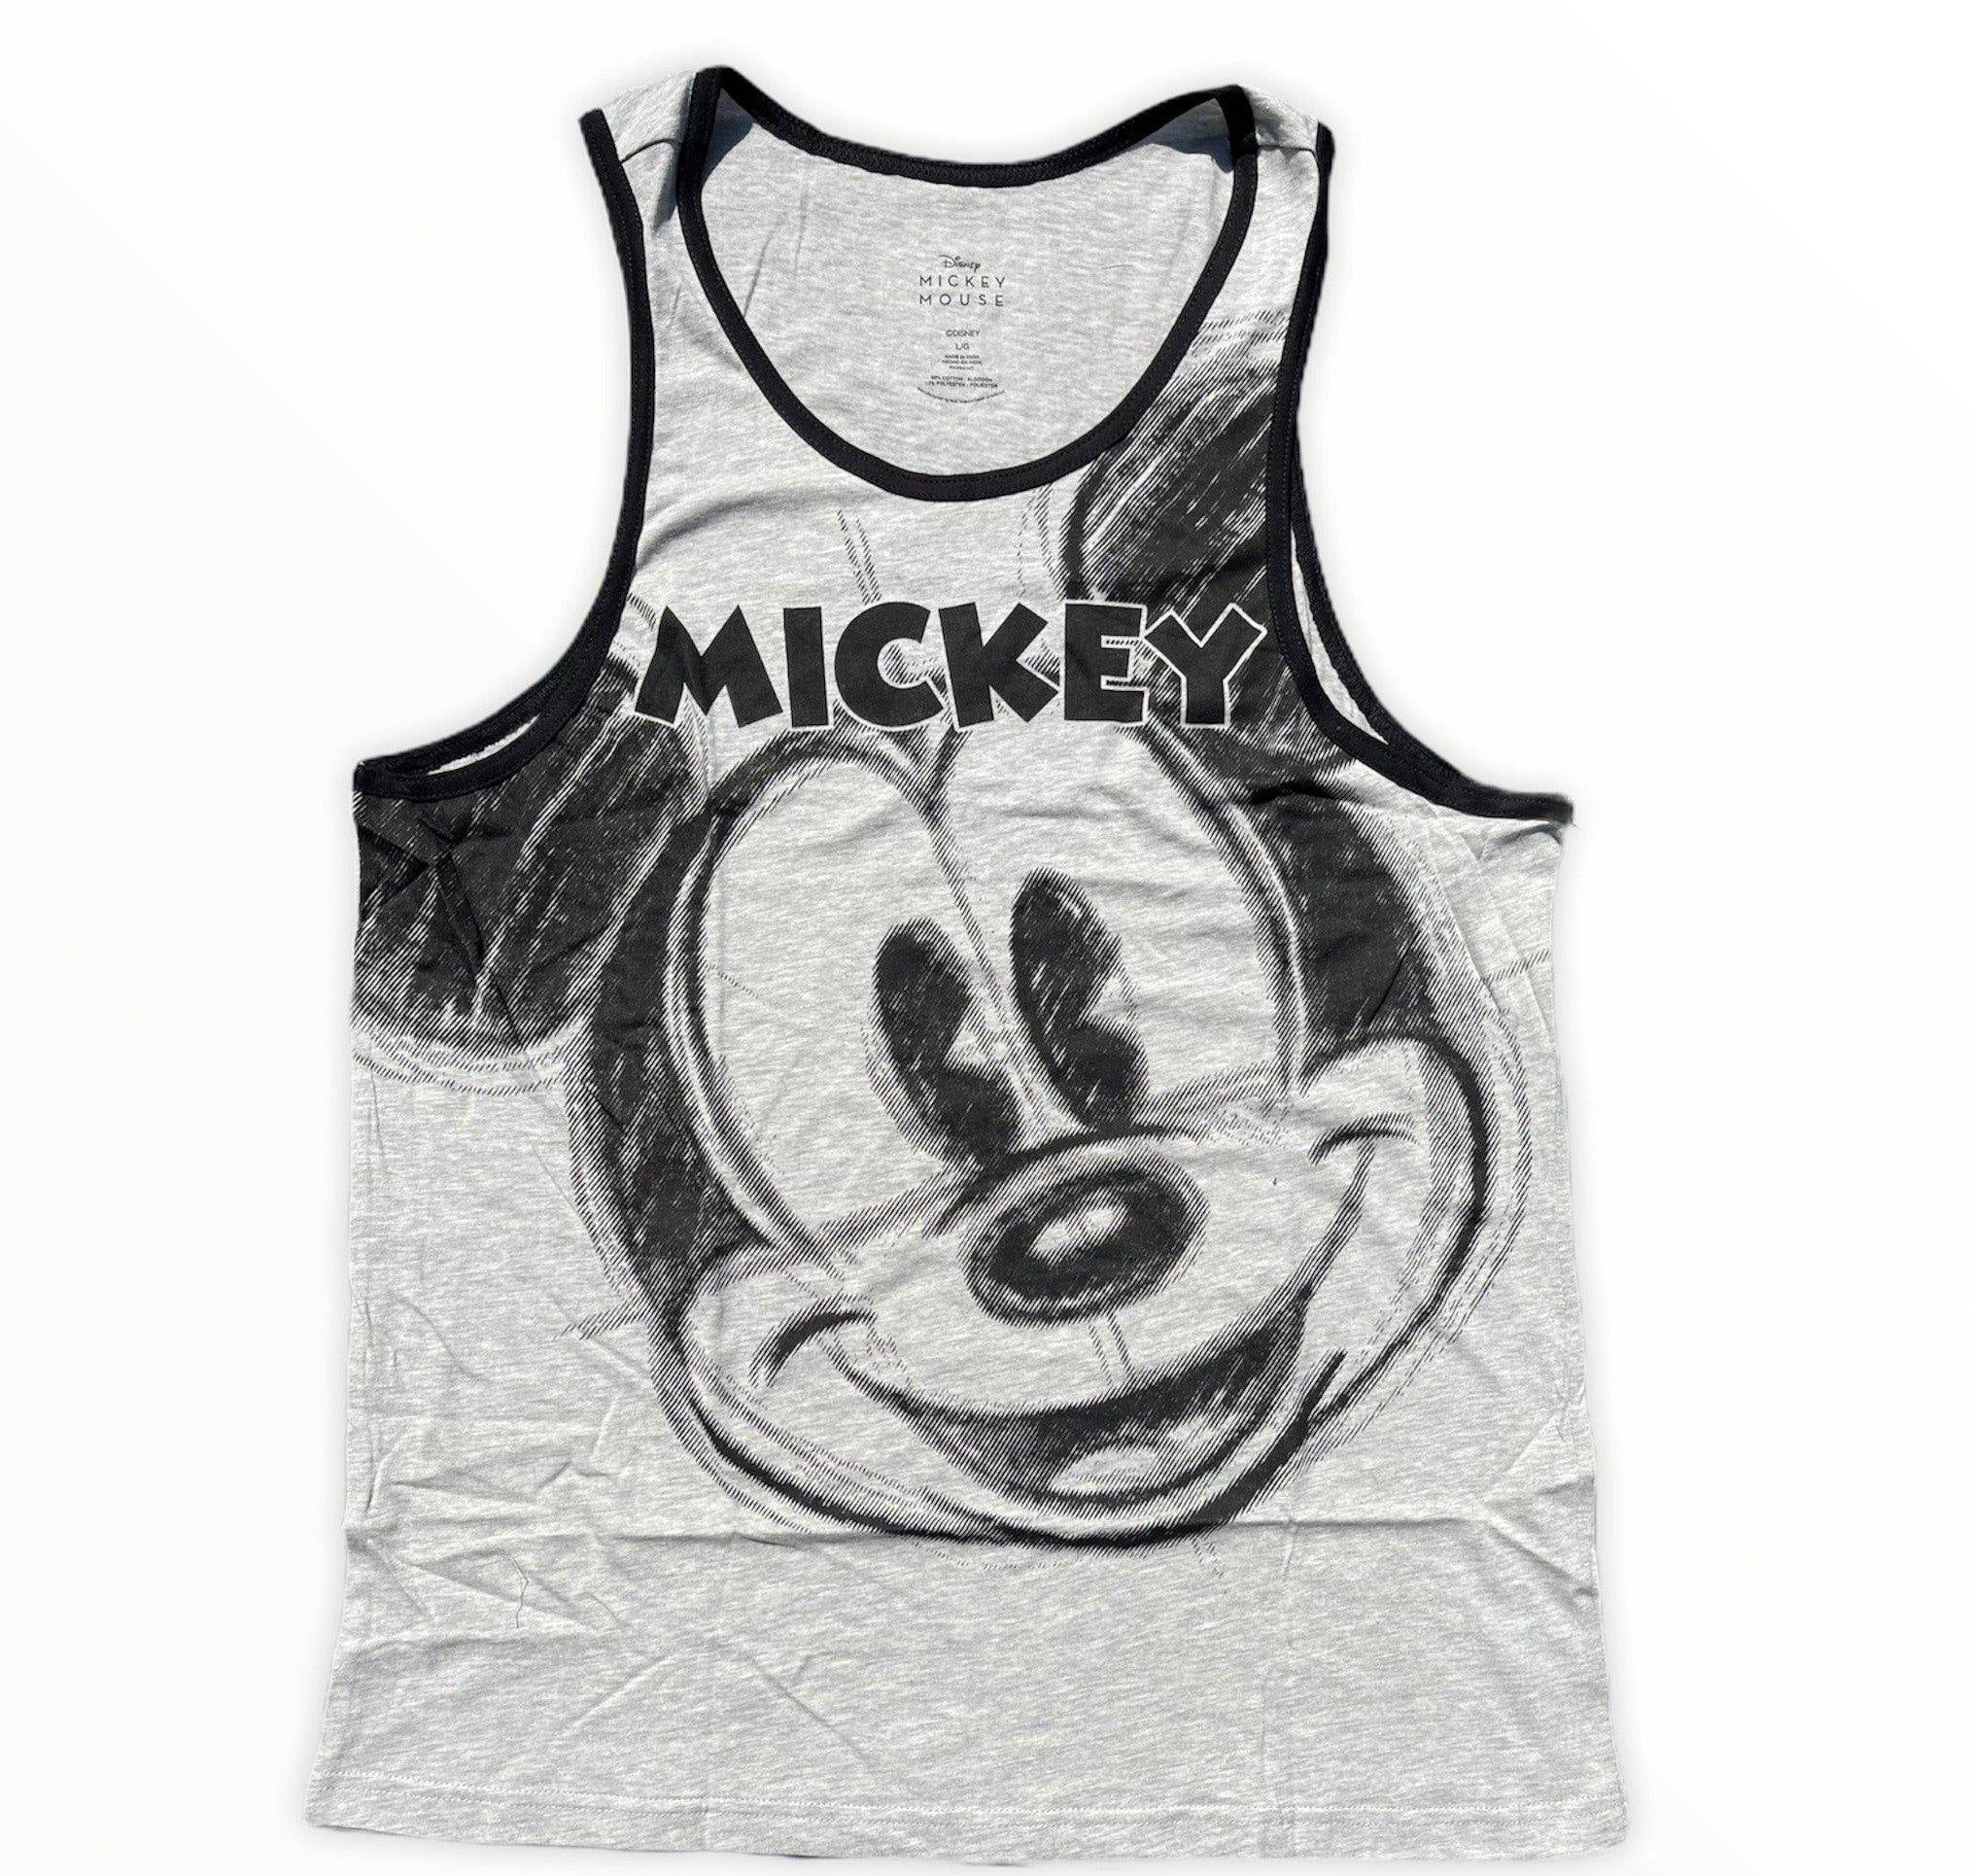 Mad Mickey Mouse Distressed Tank Top Adult Tee Graphic T-Shirt for Men Tshirt 